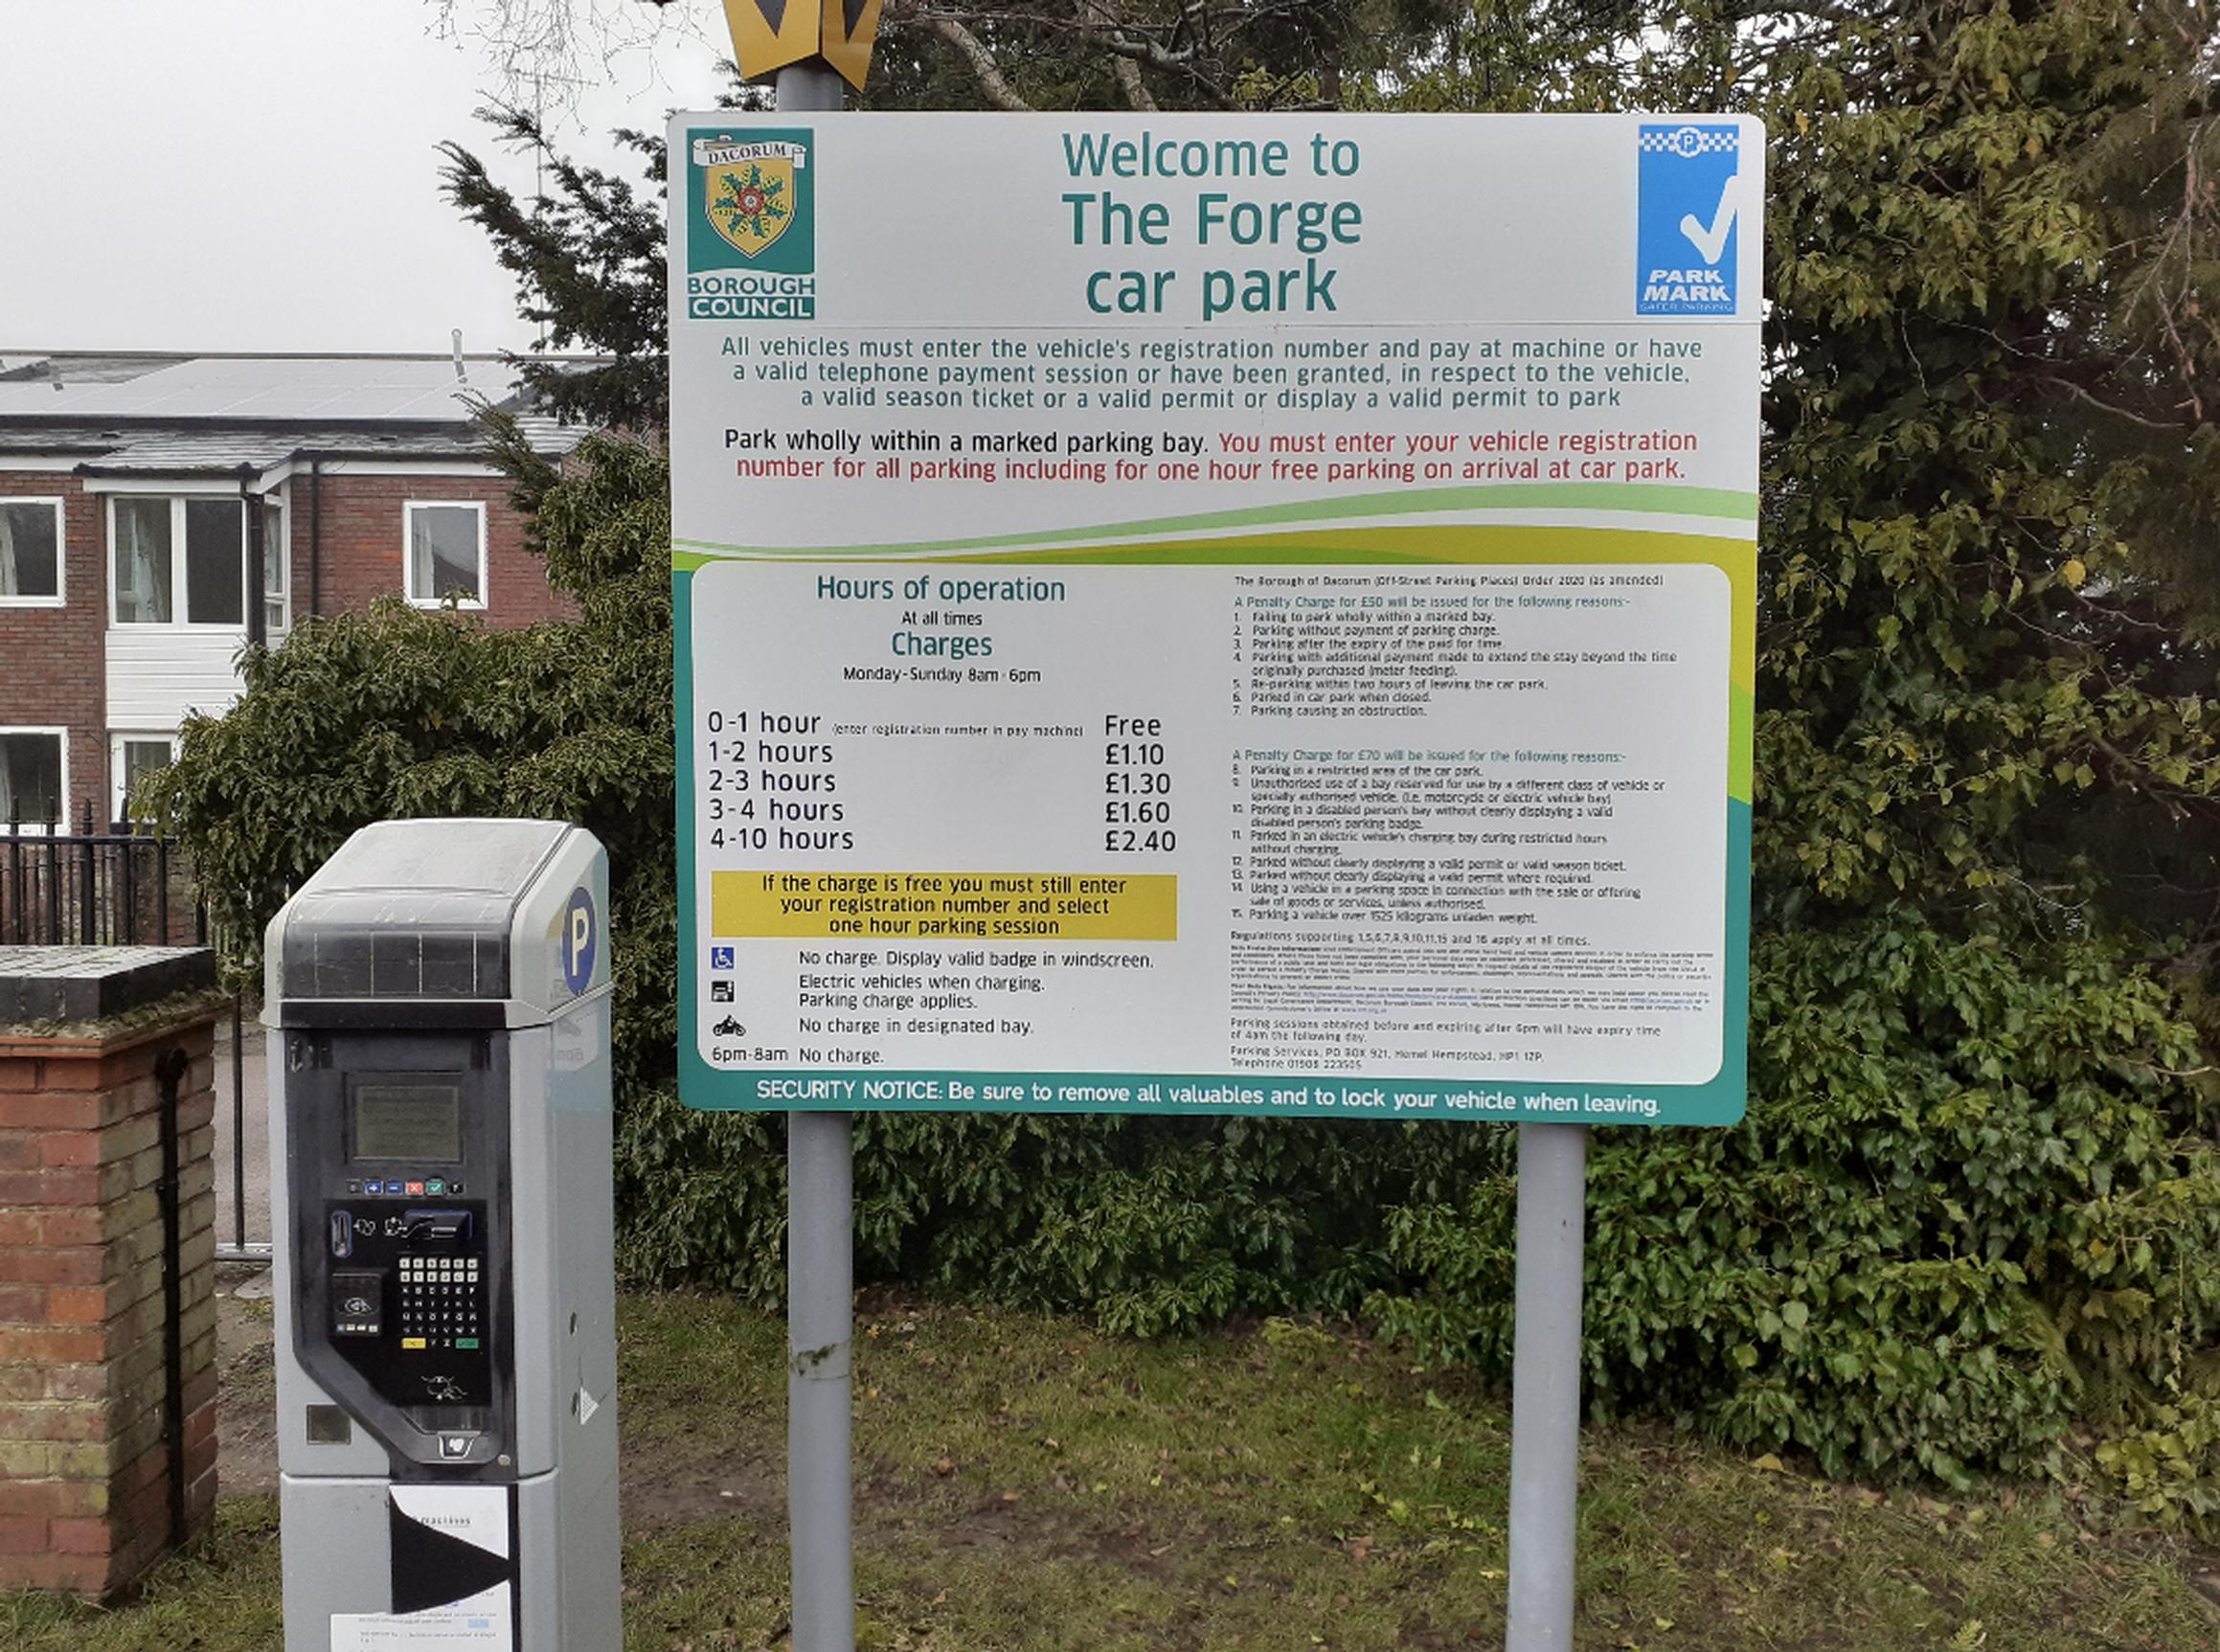 The Forge car park has been reaccredited